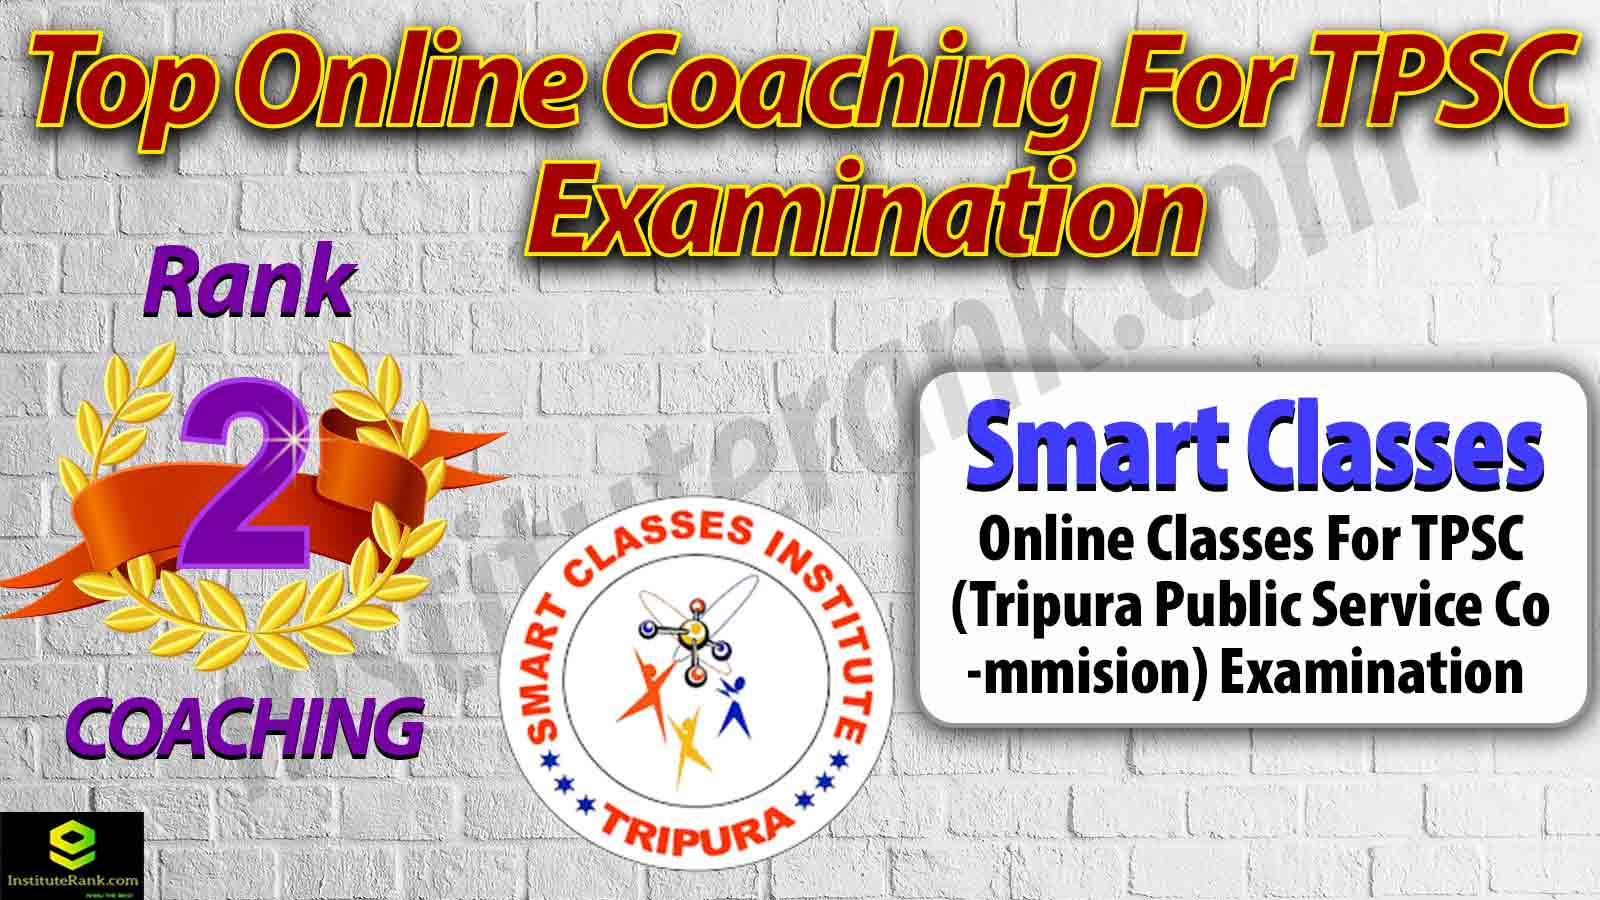 Best Online Coaching Preparation for TPSC Examination